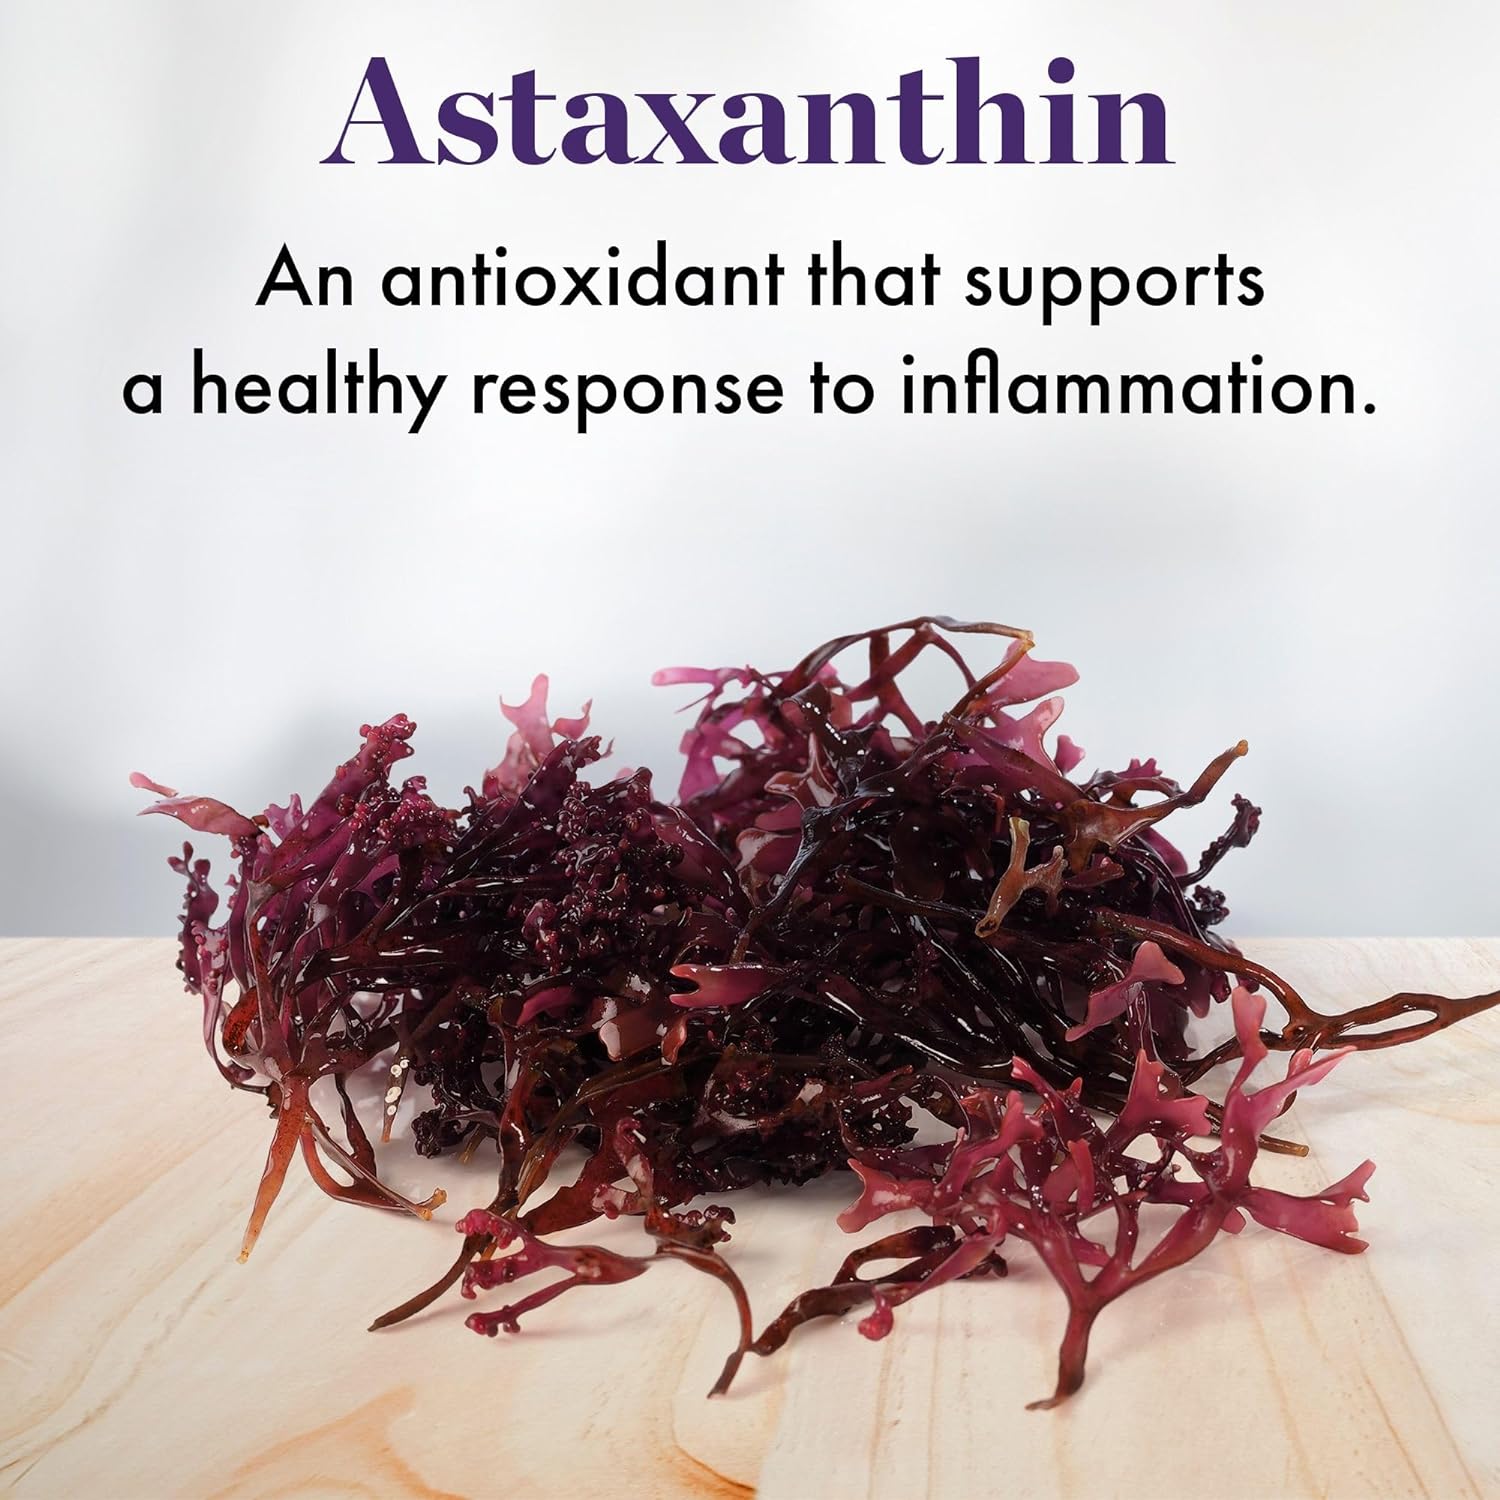 NAOMI Extra Strength Astaxanthin + CoQ10, Fat-Soluble Antioxidants, Cardiovascular Support, Increased Energy, Immune and Cognitive Function, Restore Depleted CoQ10, High Absorption, 30-Day Supply : Health & Household